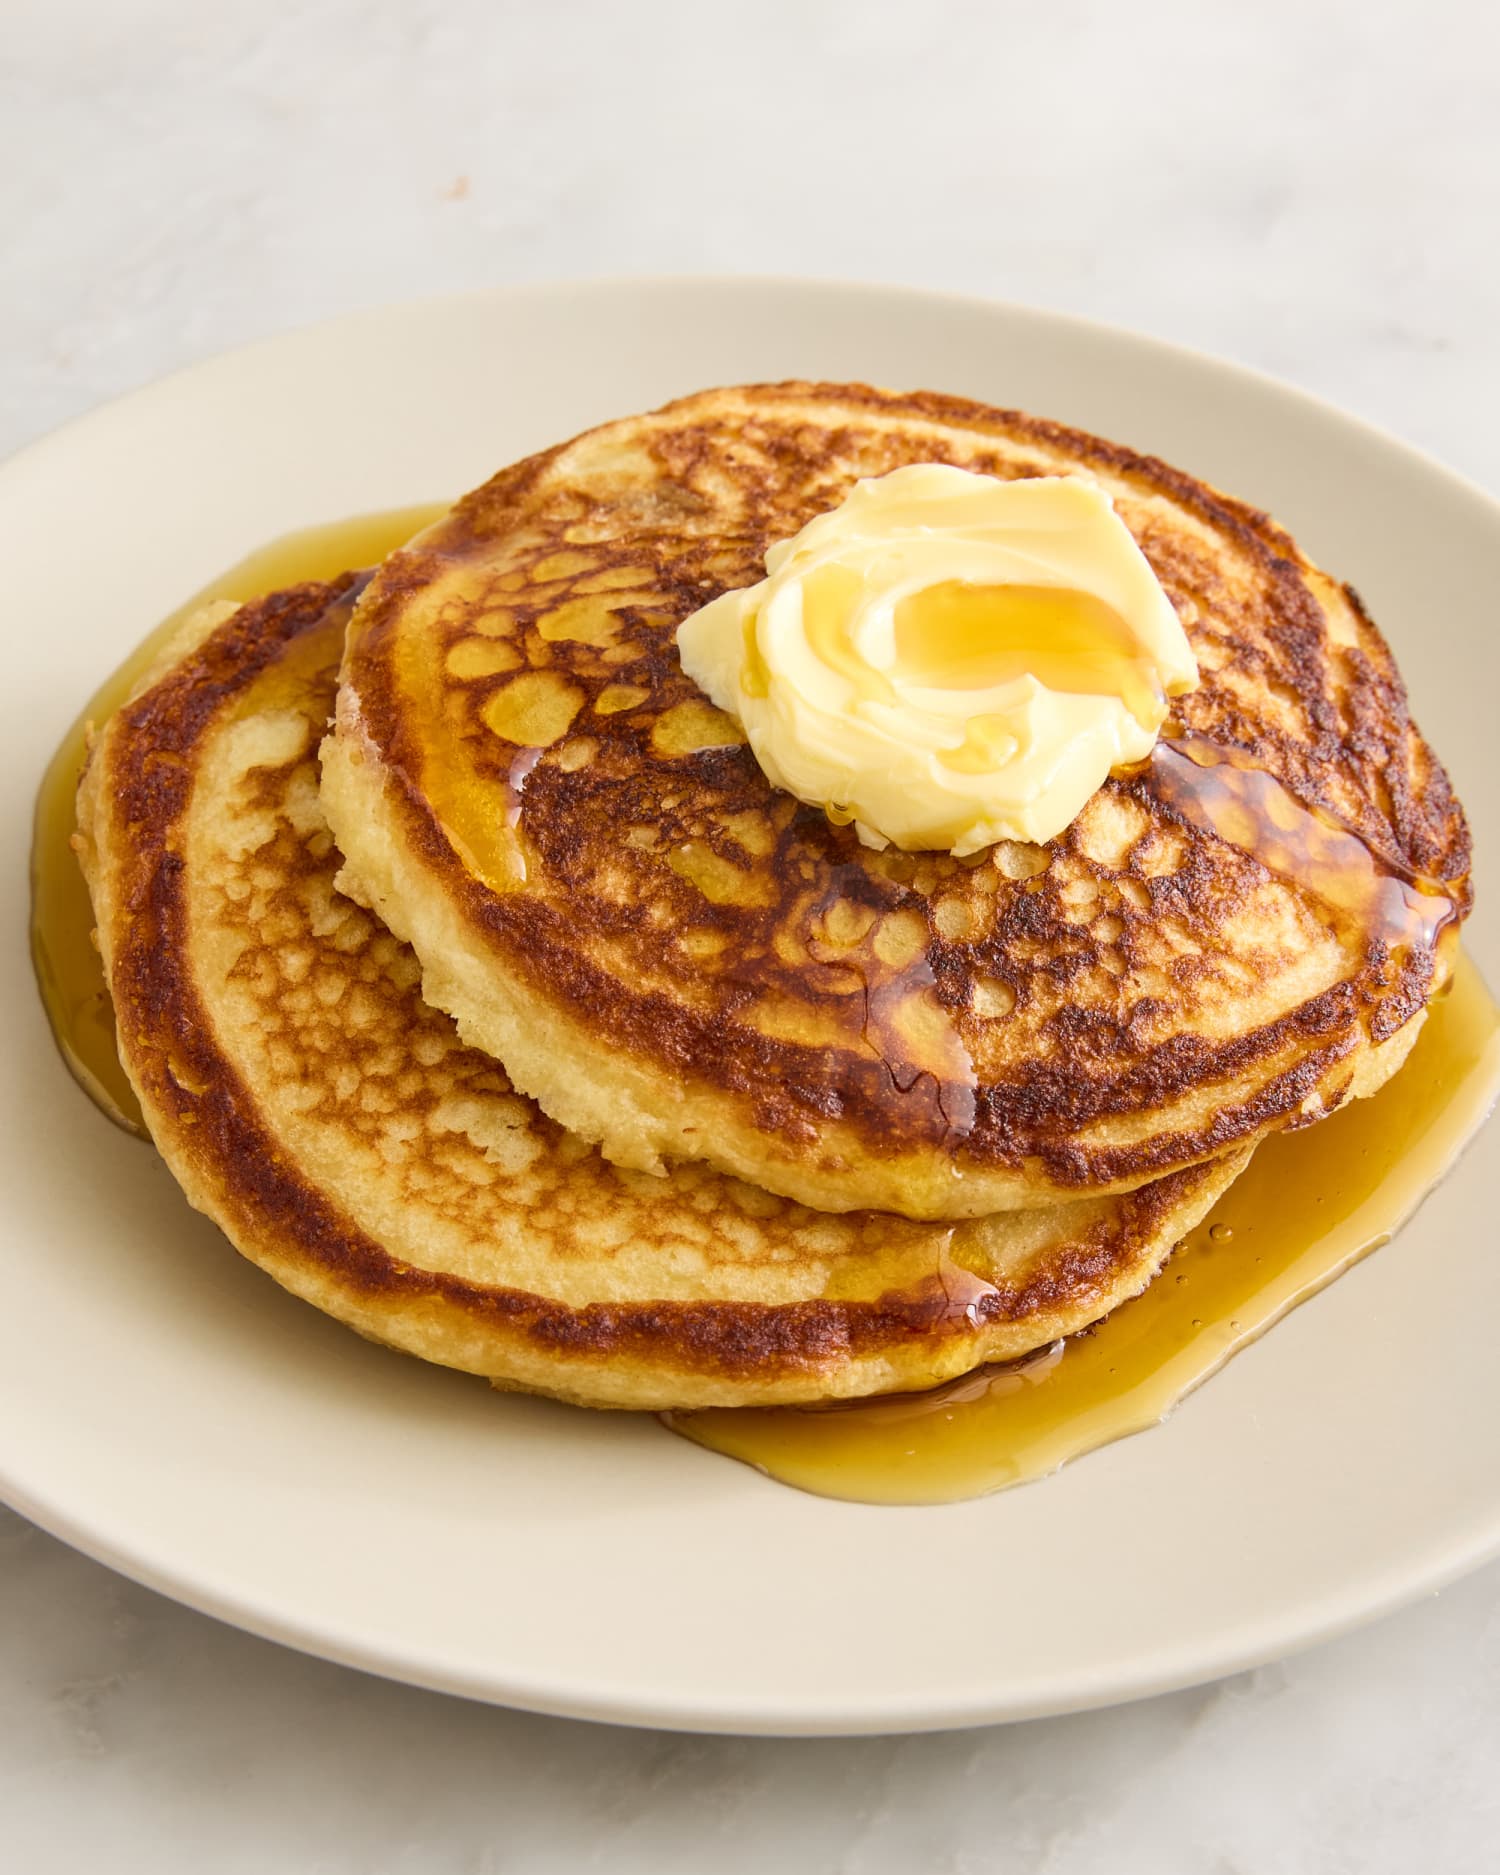 I’ve Made Dozens of Pancake Recipes, but This Is THE Best One (by Far!)